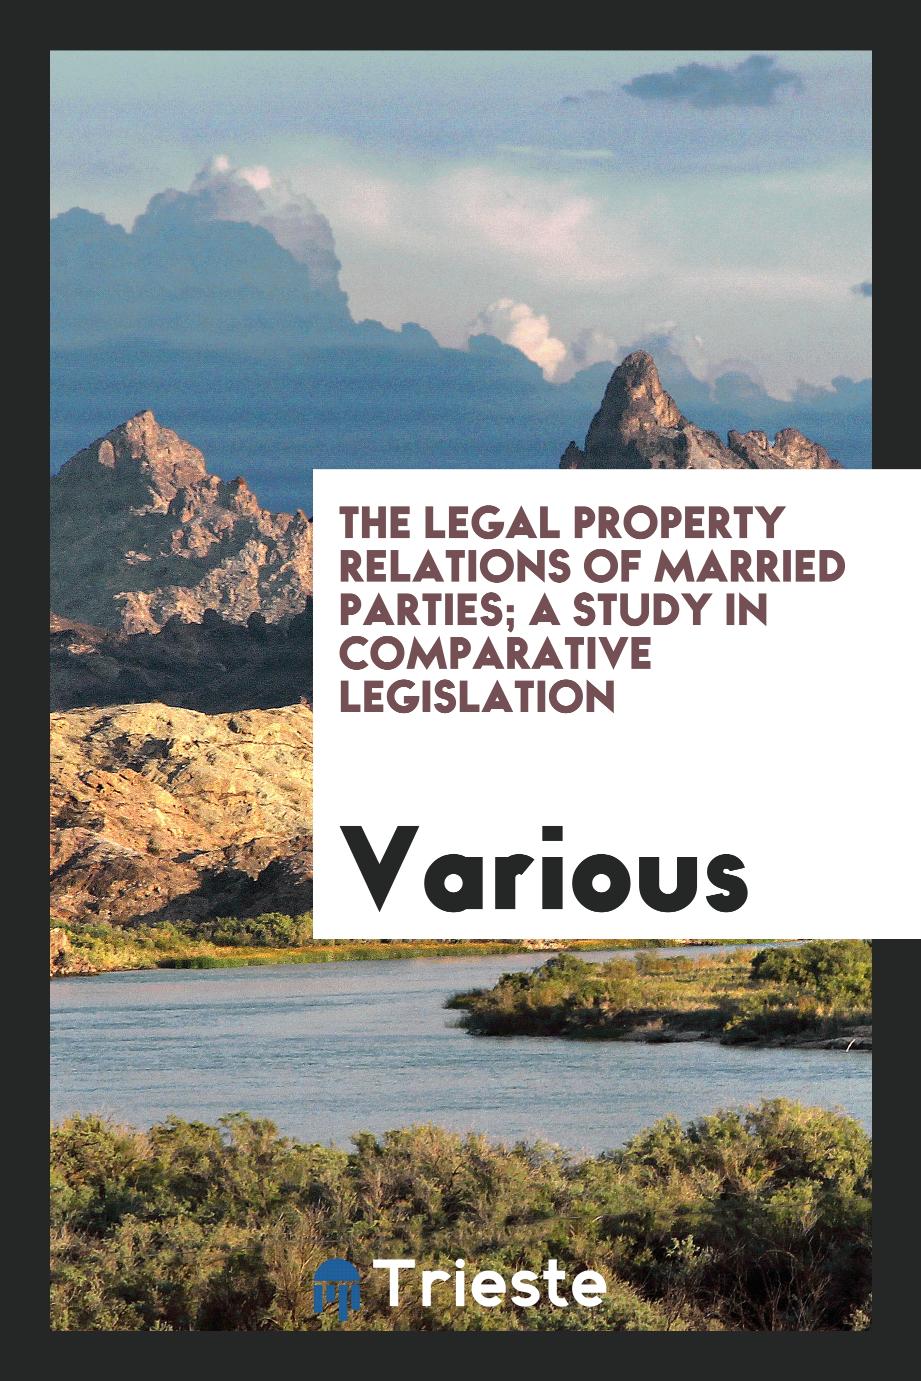 The legal property relations of married parties; a study in comparative legislation